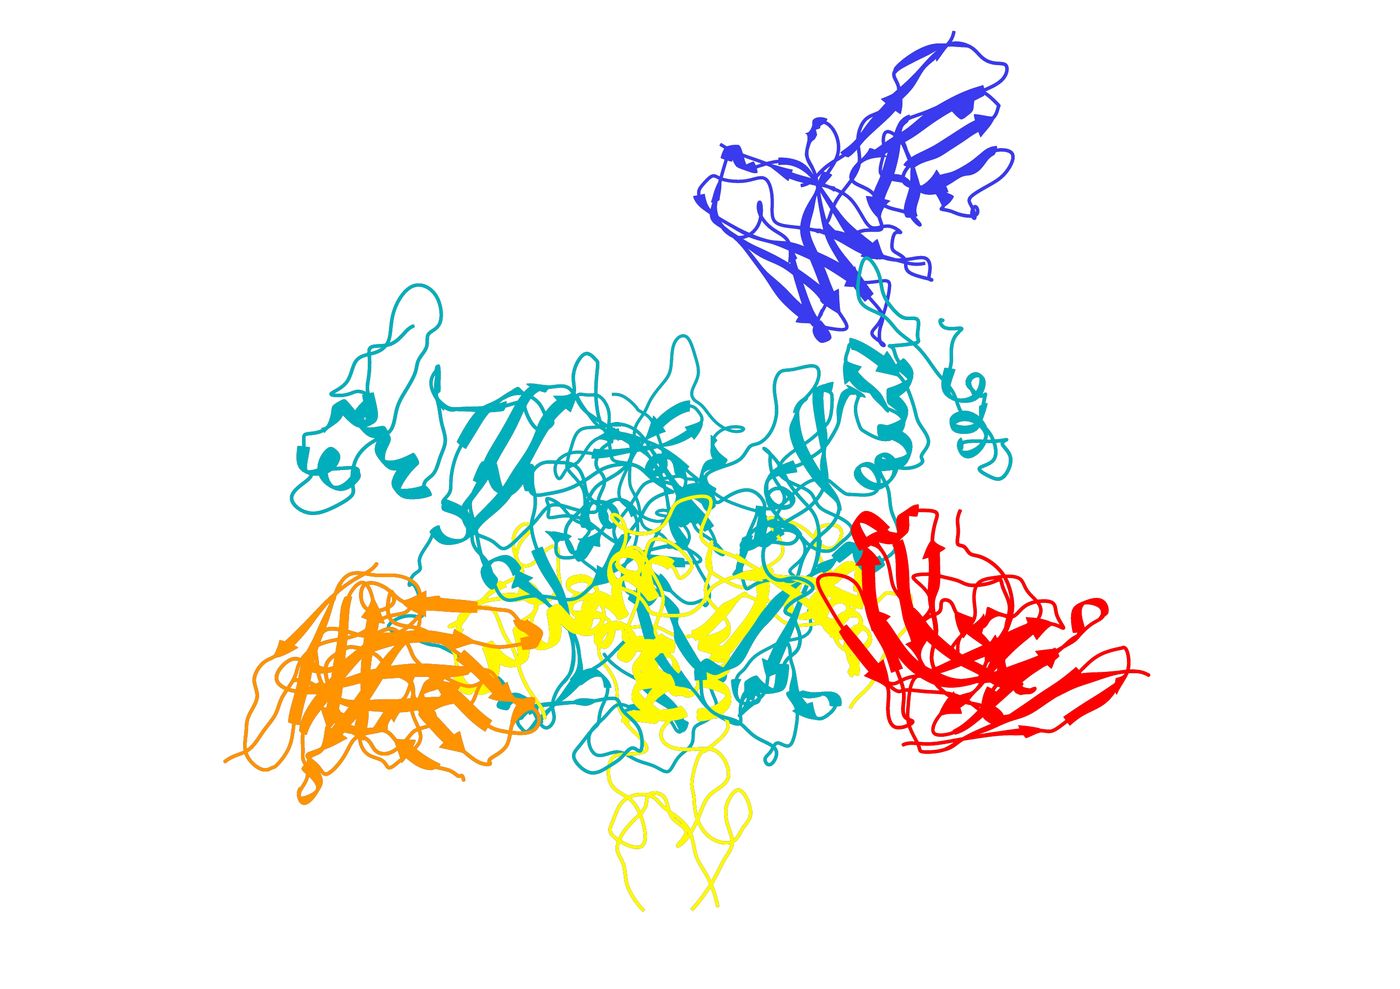 The Scripps Research team succeeded in showing how experimental therapy ZMapp targets the Ebola virus, here targeting the virus's GP protein. (Image courtesy of Andrew Ward and Jesper Pallesen.)